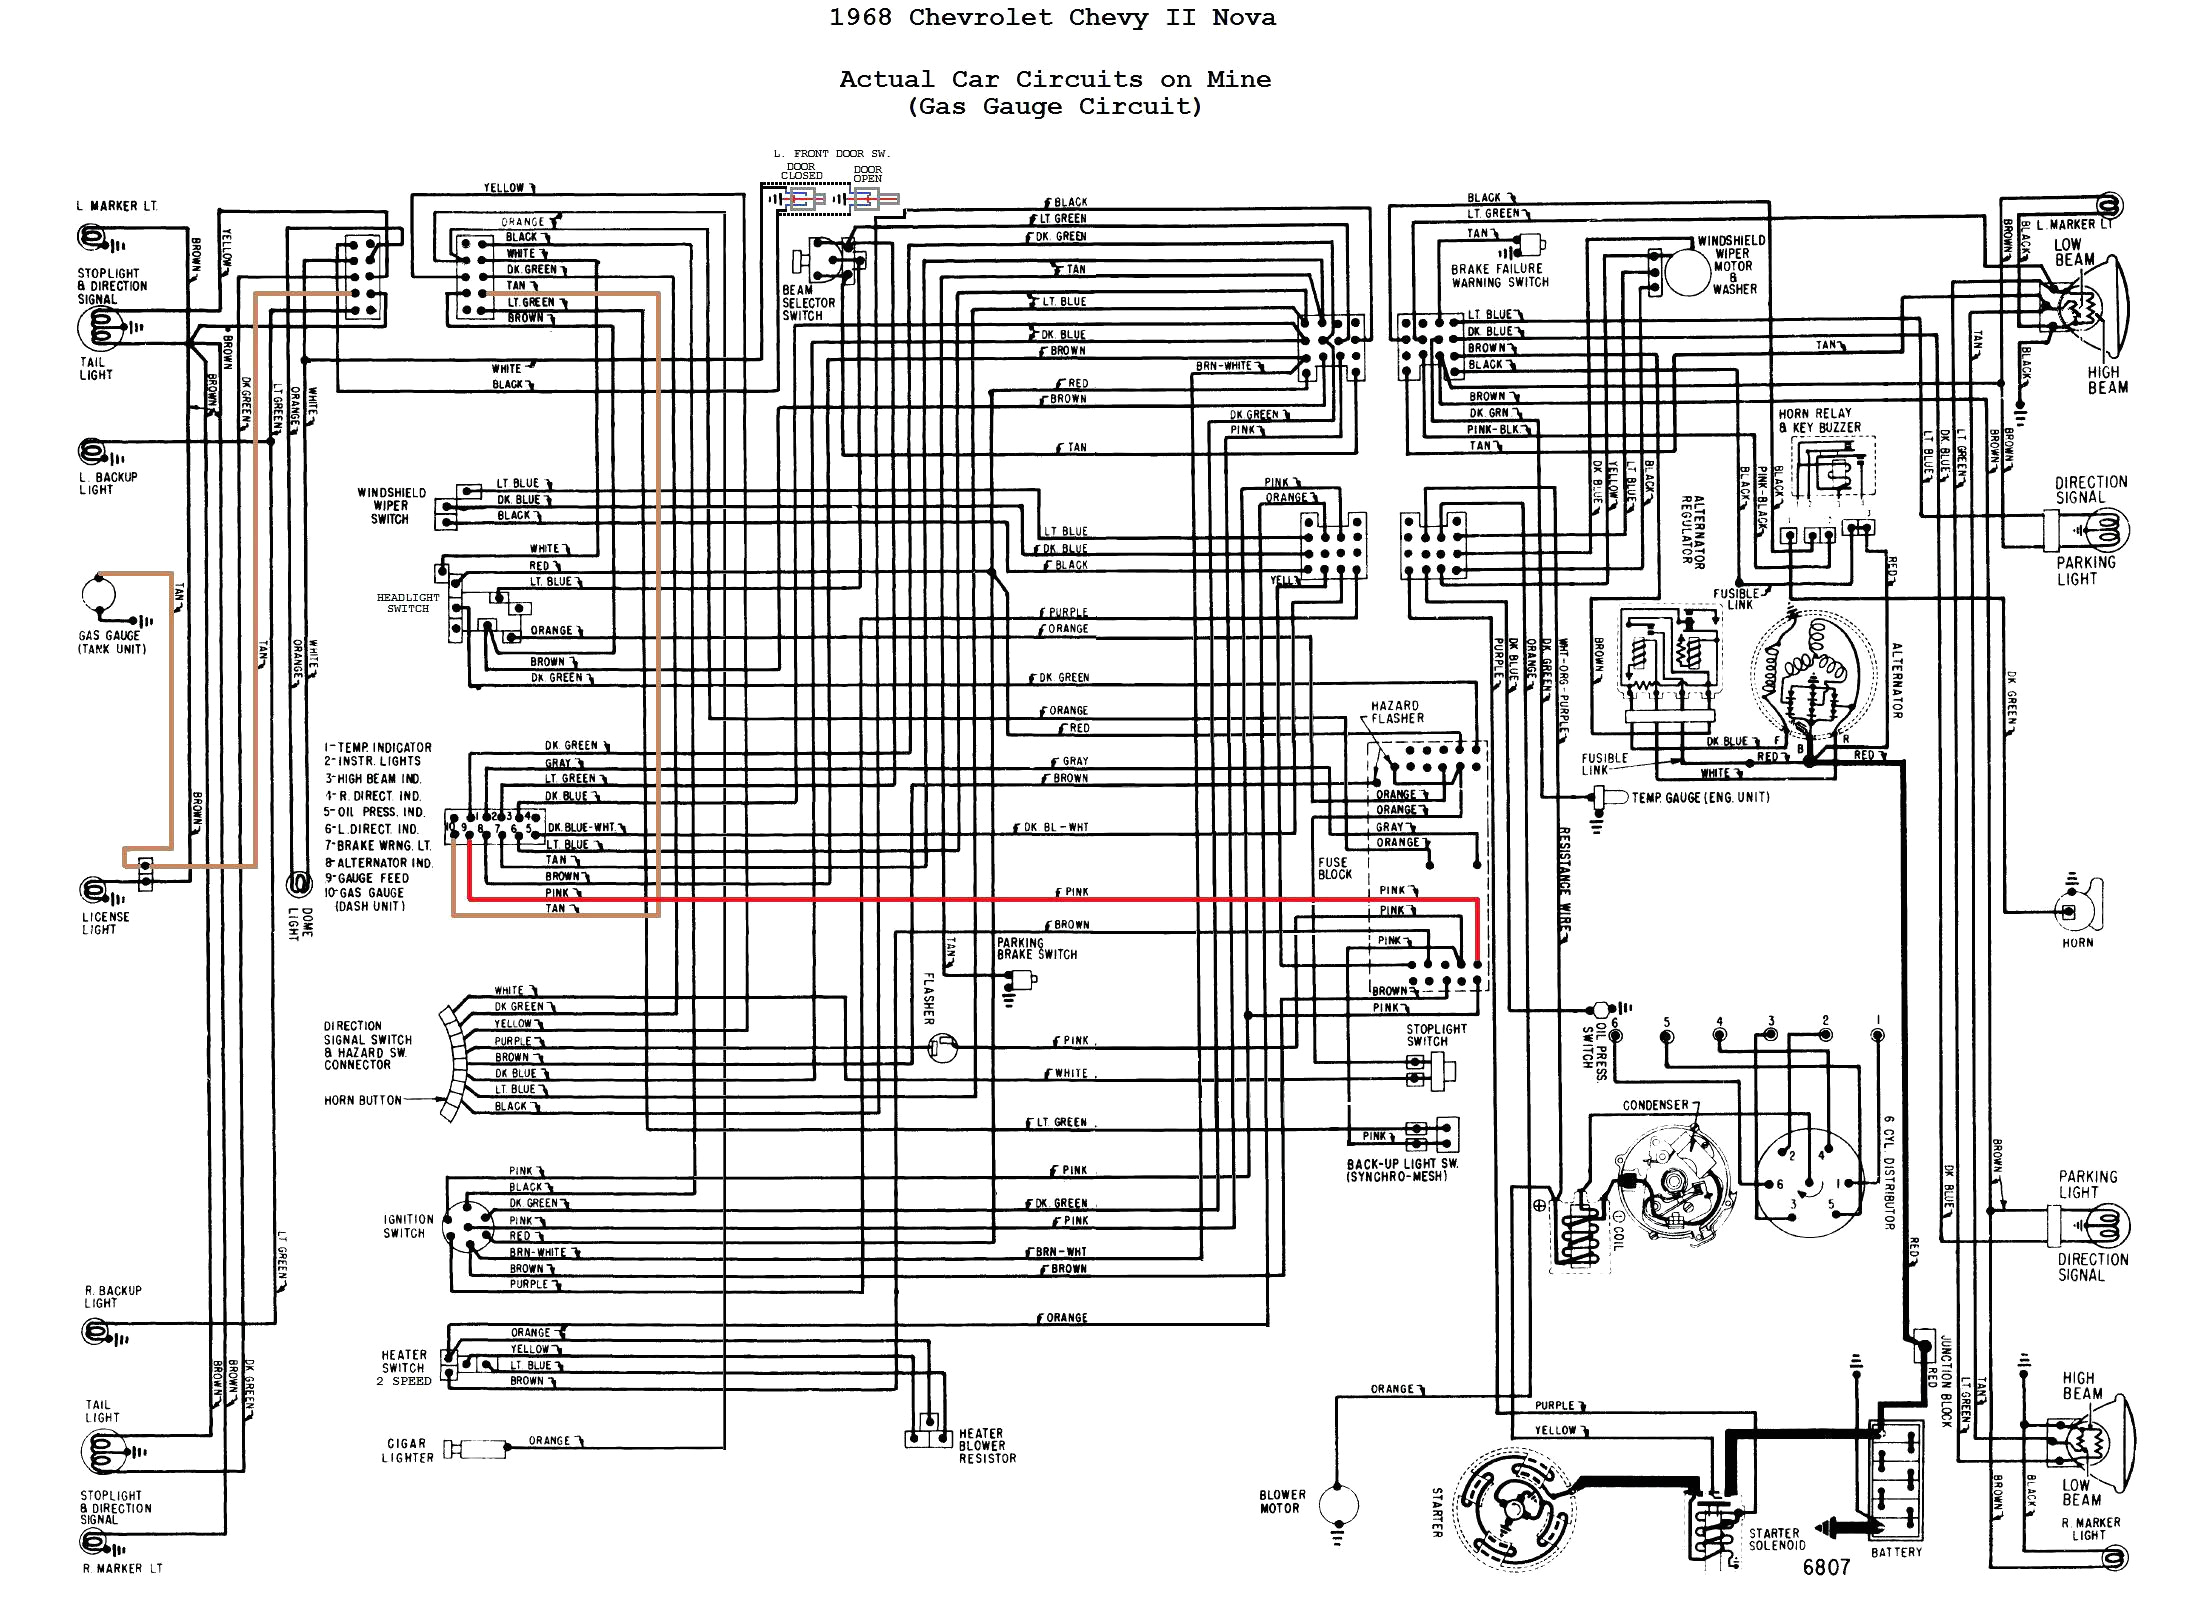 1971 chevelle wiper motor wiring diagram rate chevy alternator wiring diagram 1968 c10 trusted wiring diagrams e280a2 of 1971 chevelle wiper motor wiring diagram jpg